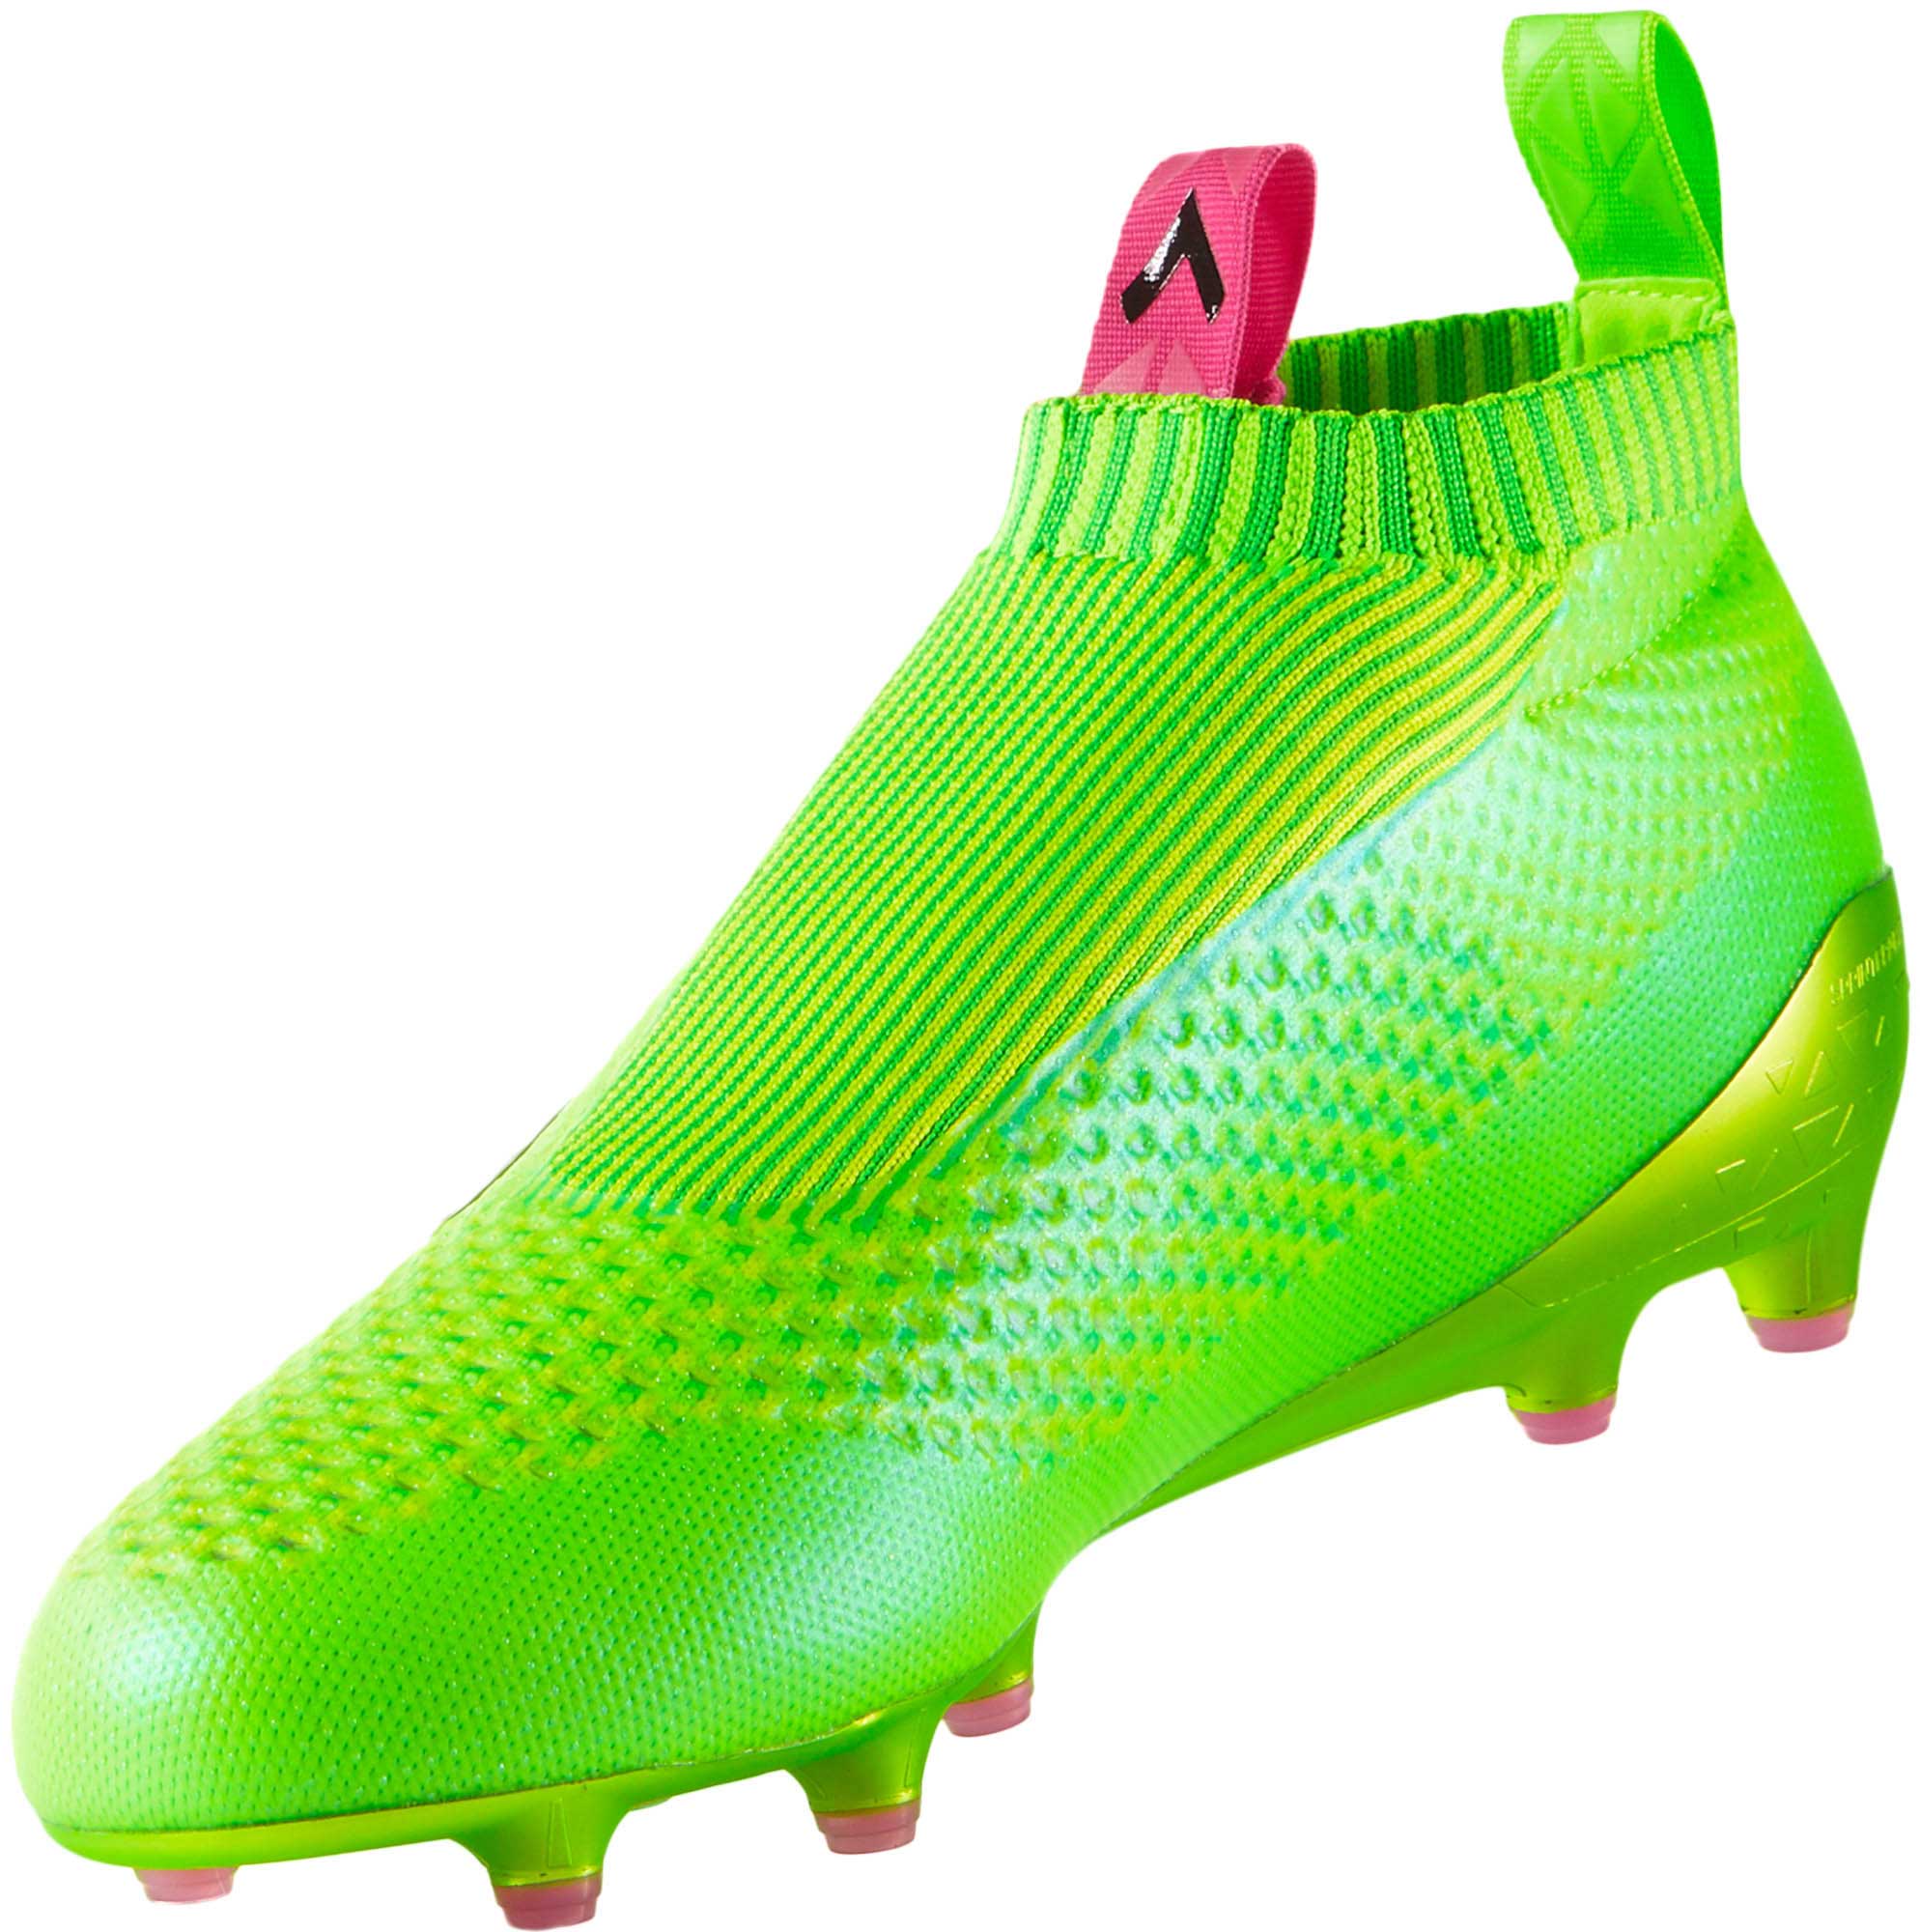 ACE 16+ GTI FG/AG - Pure Control - Solar Green & Shock Pink - Soccer Master